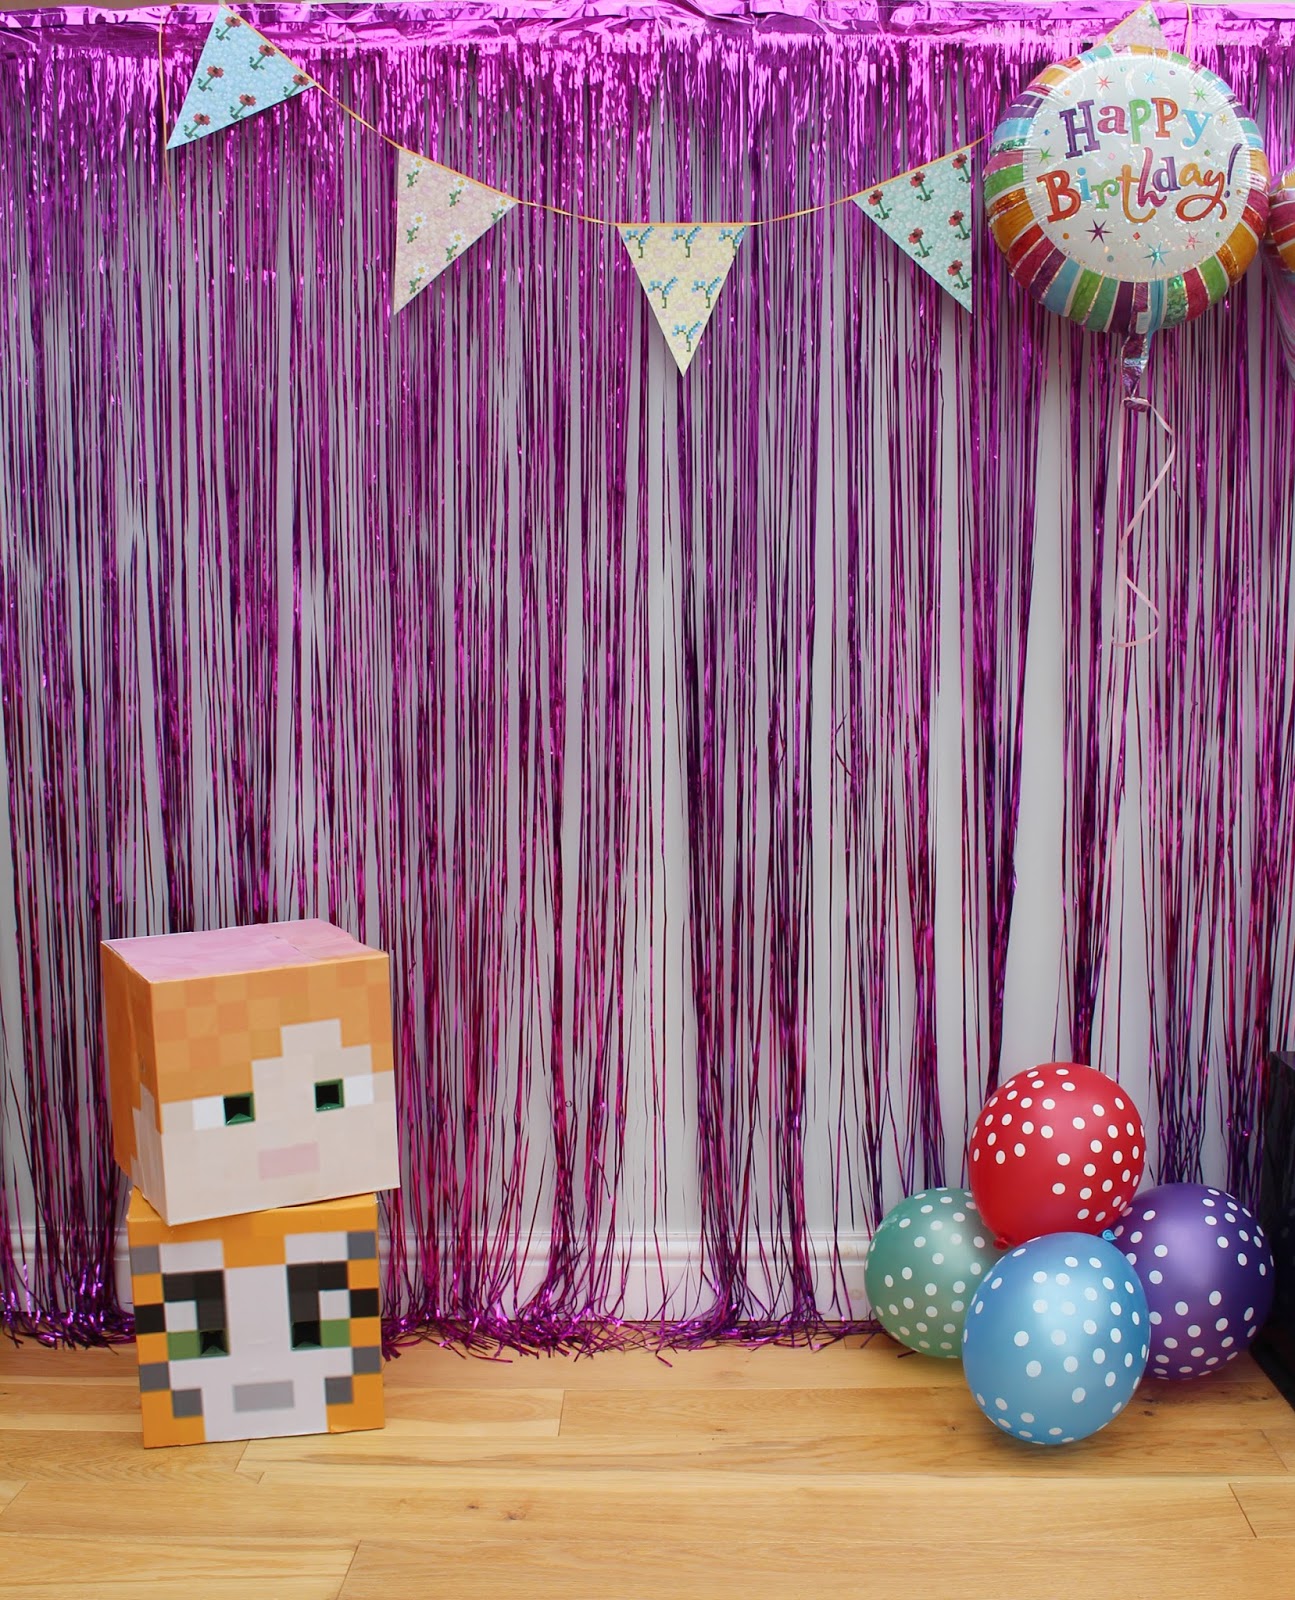 I went to a little girl's Minecraft birthday party. Here is her